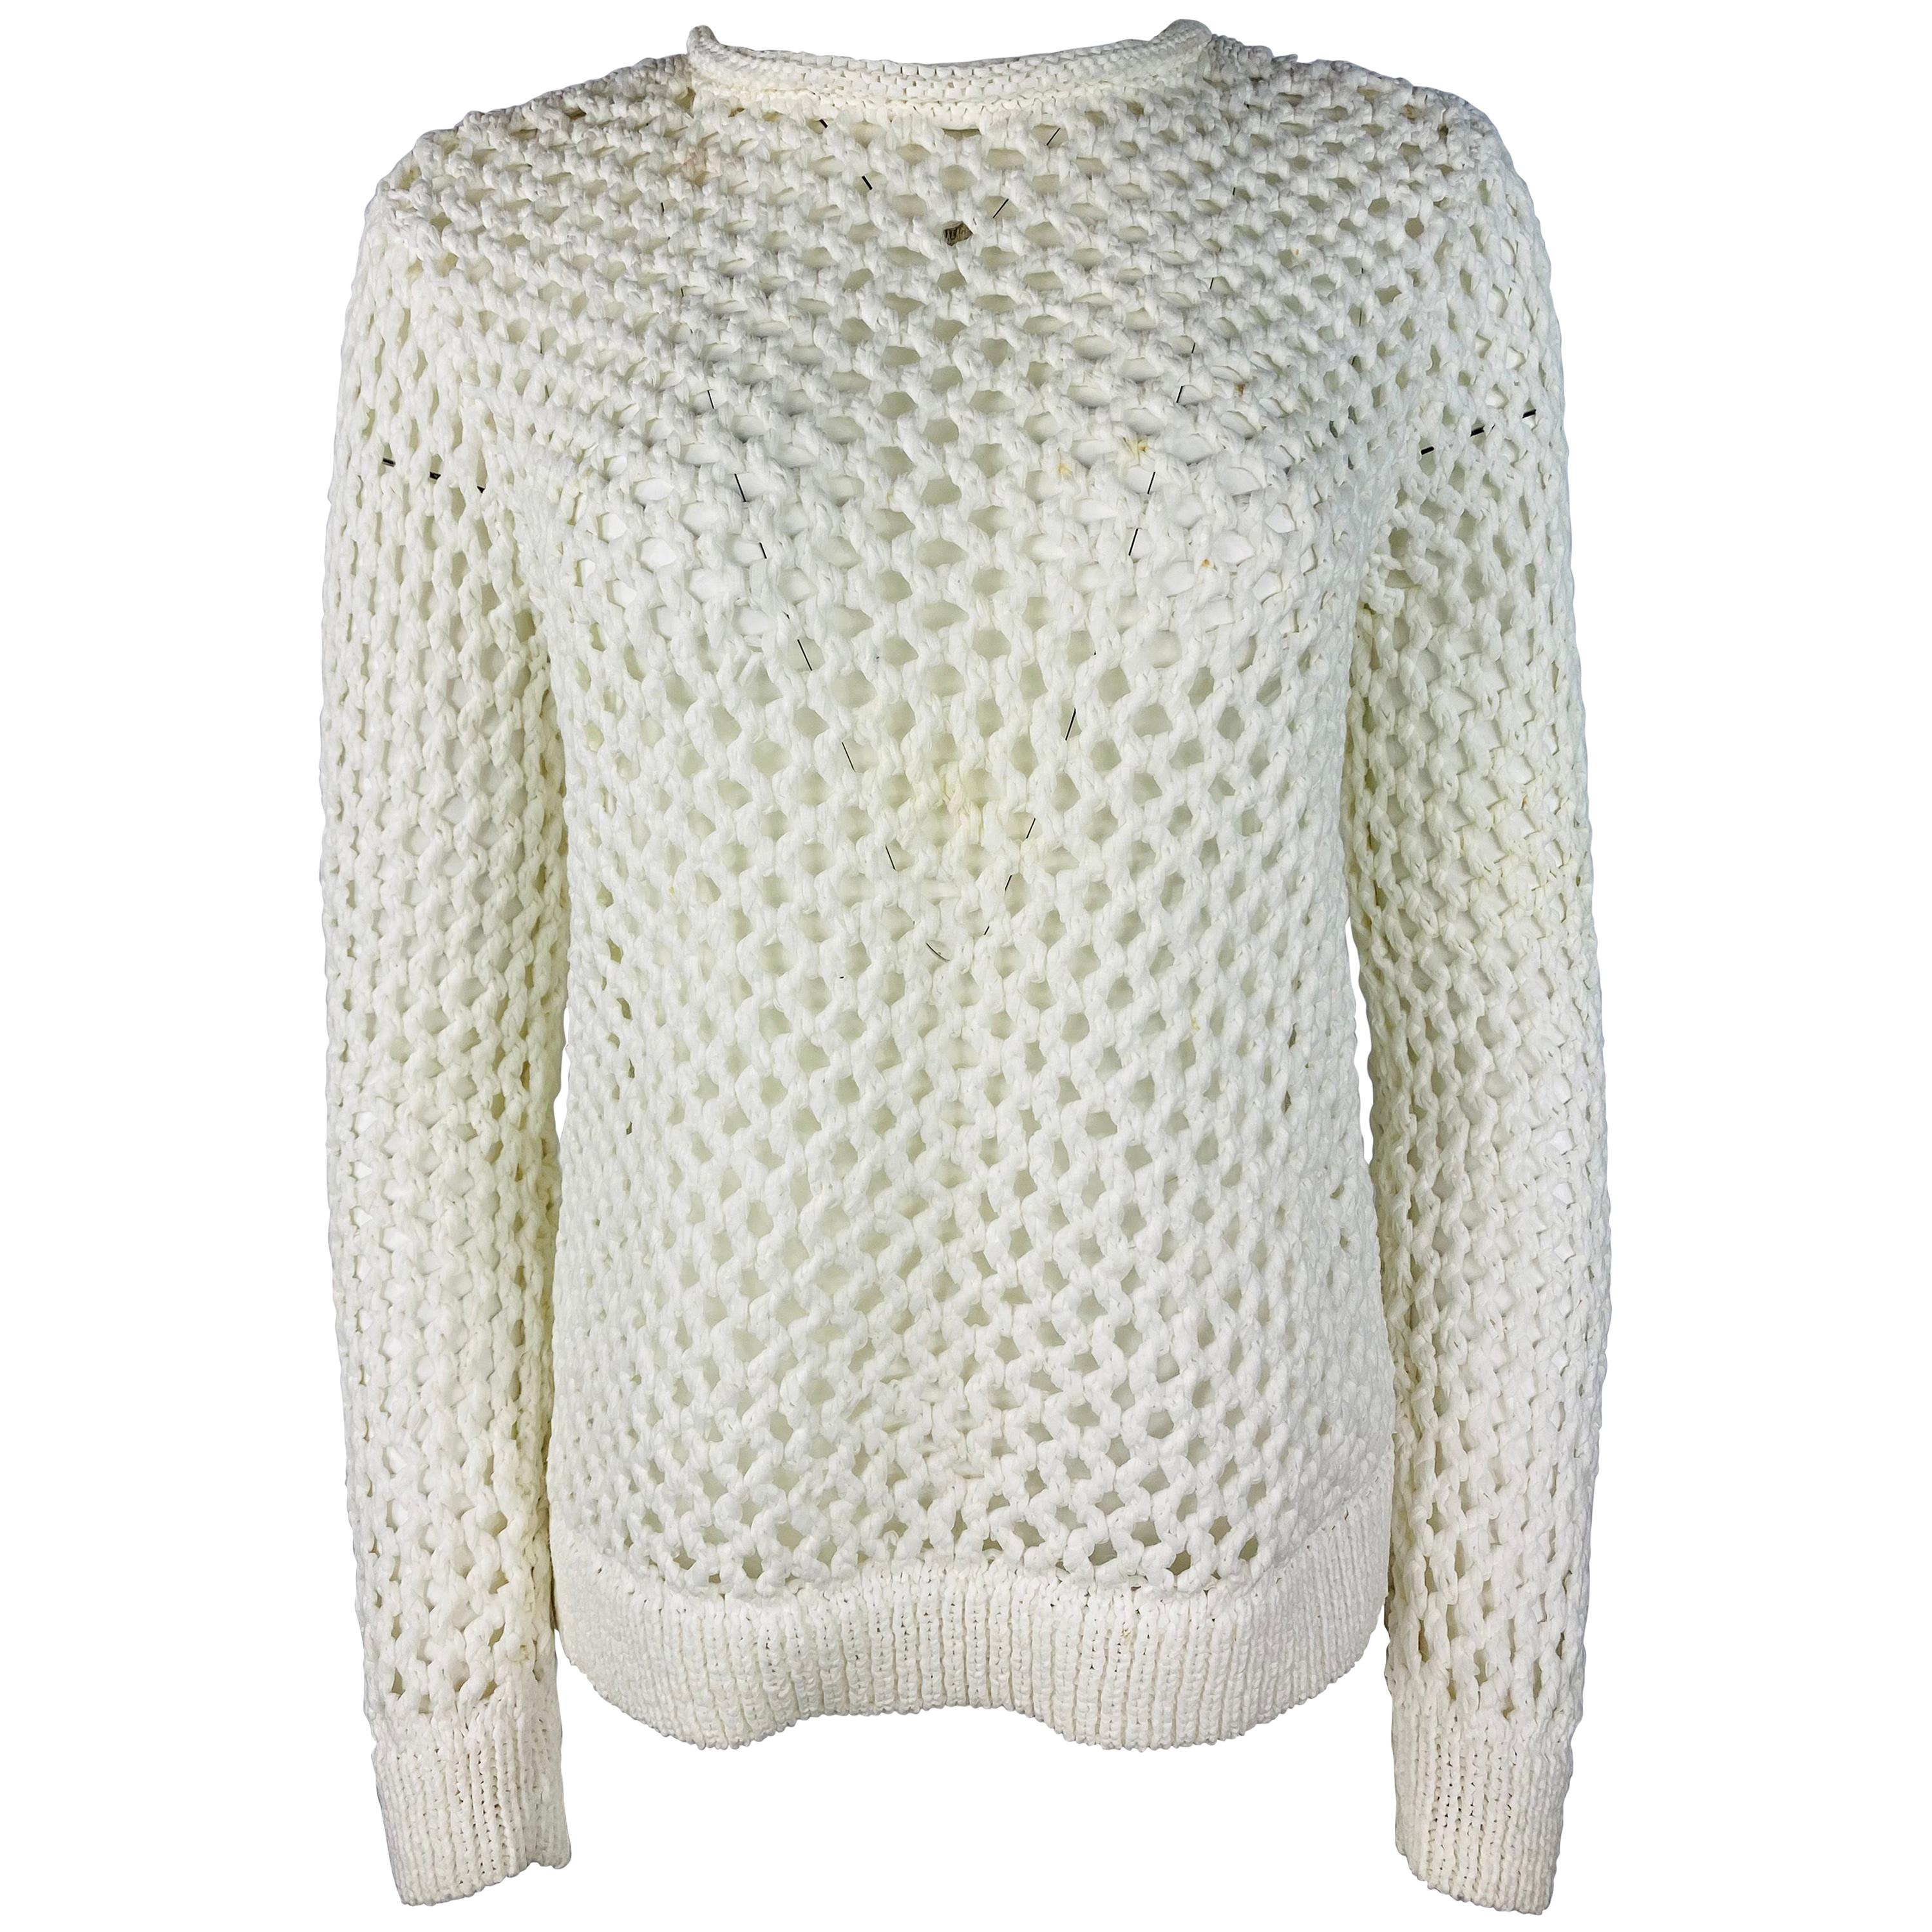 T by Alexander Wang White Knit Sweater Top, Size Small